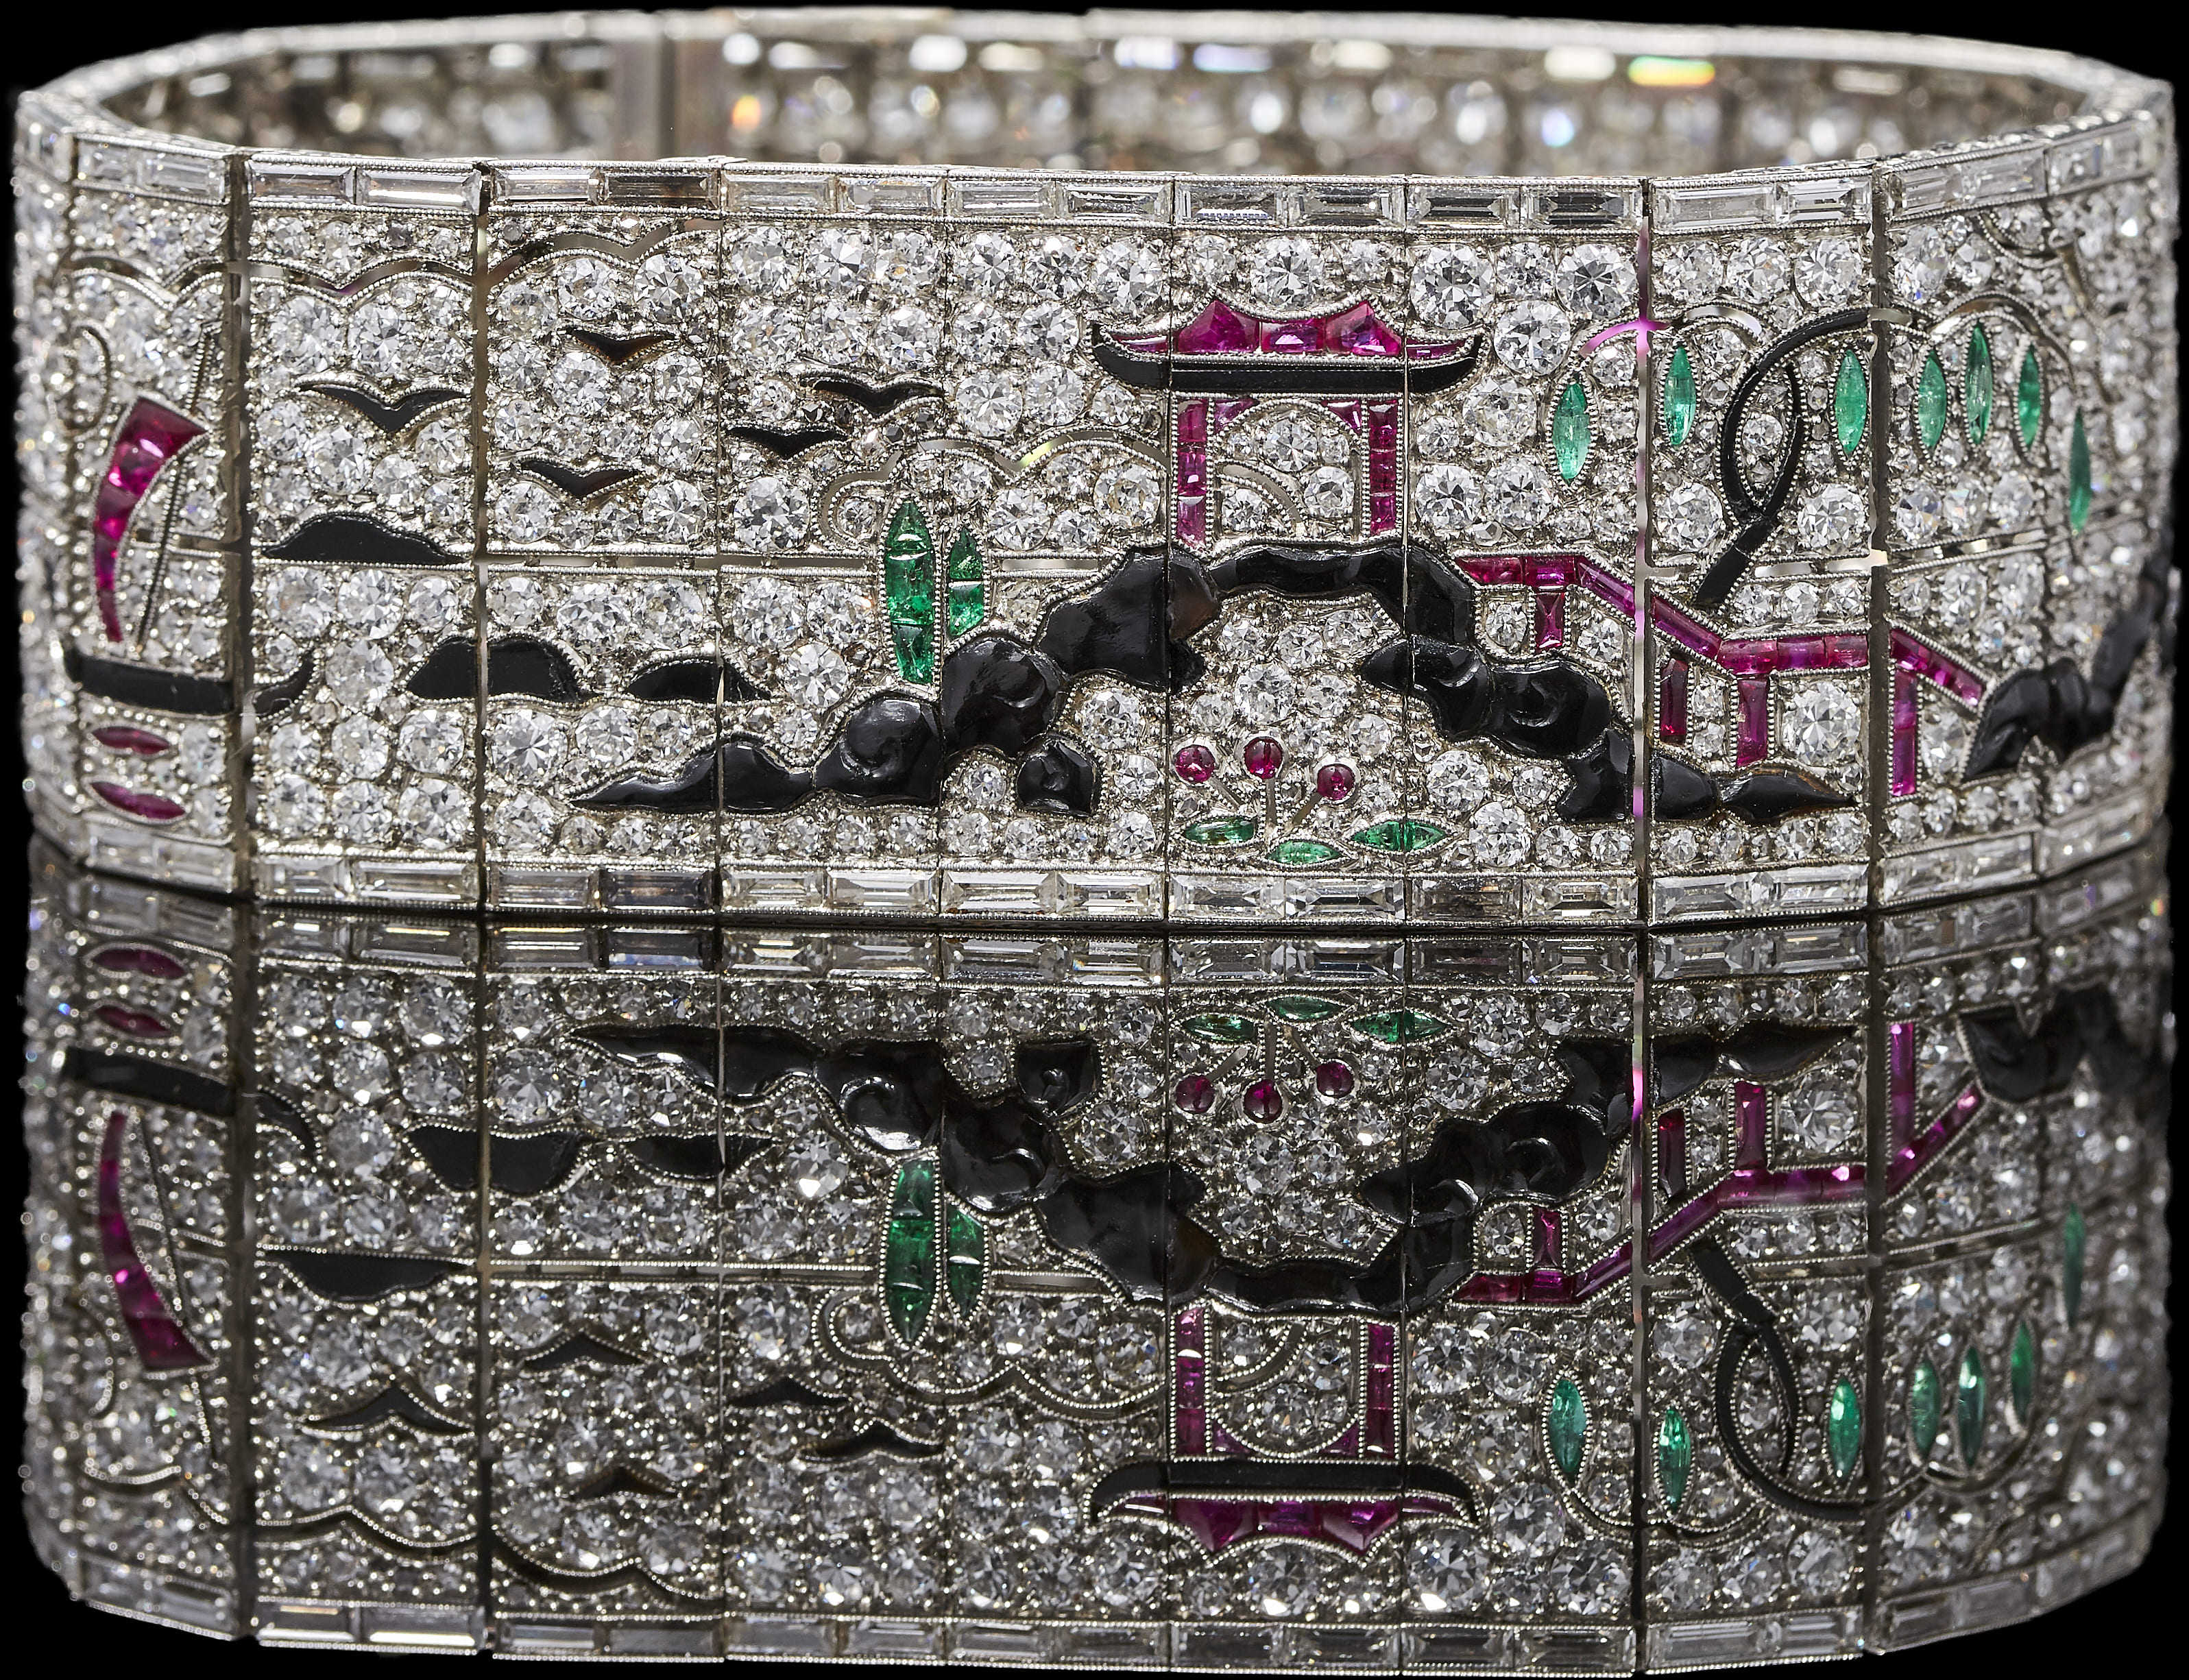 The storied high jewellery maison of Lacloche, which ran from the French capital from 1892 to 1967, is celebrated at an exhibition at L’École, School of Jewellery Arts in Hong Kong’s K11 Musea, with pieces on display like this 1925 bracelet in platinum and white gold, ruby, emerald, obsidian and diamond. Photo: L’École Van Cleef & Arpels